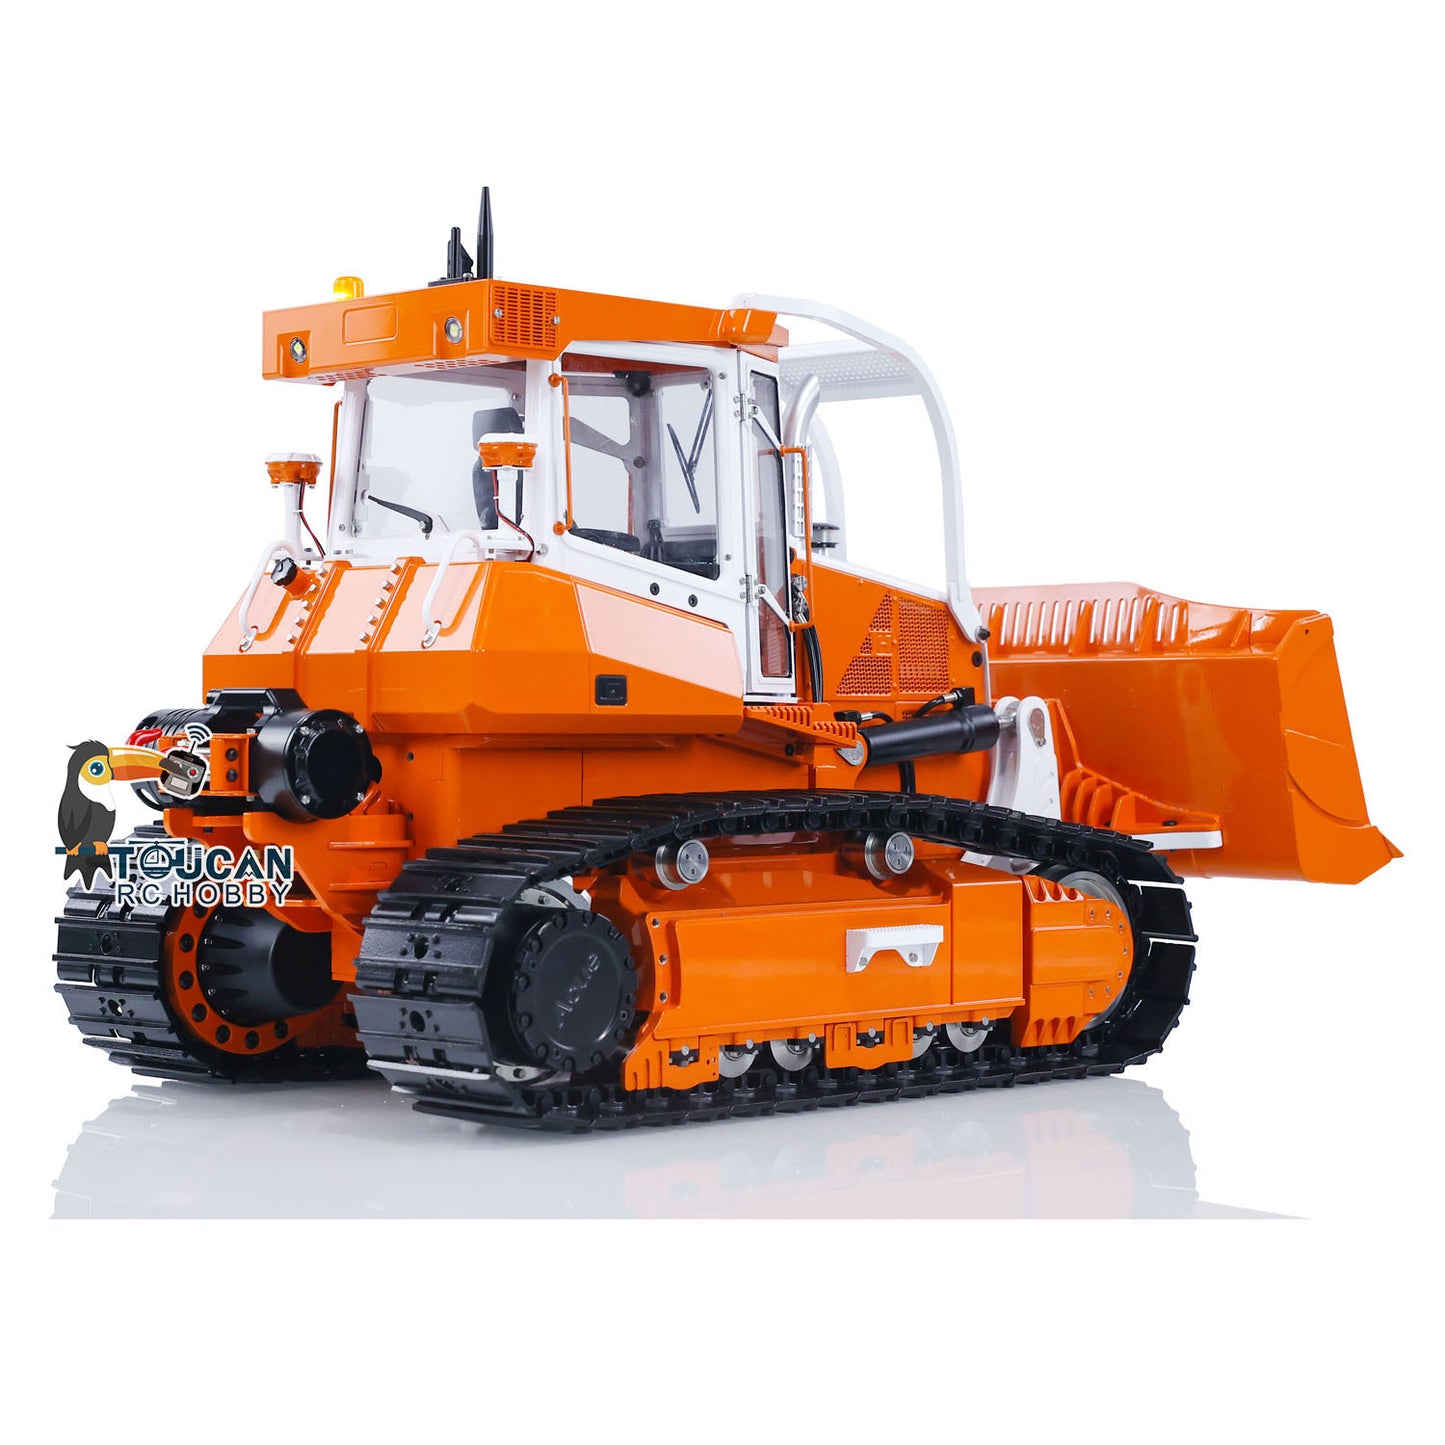 IN STOCK LESU Metal 1/14 RC Hydraulic Bulldozers 850K Radio Controlled Construction Vehicles DIY Car Toy Gift Painted Assembled